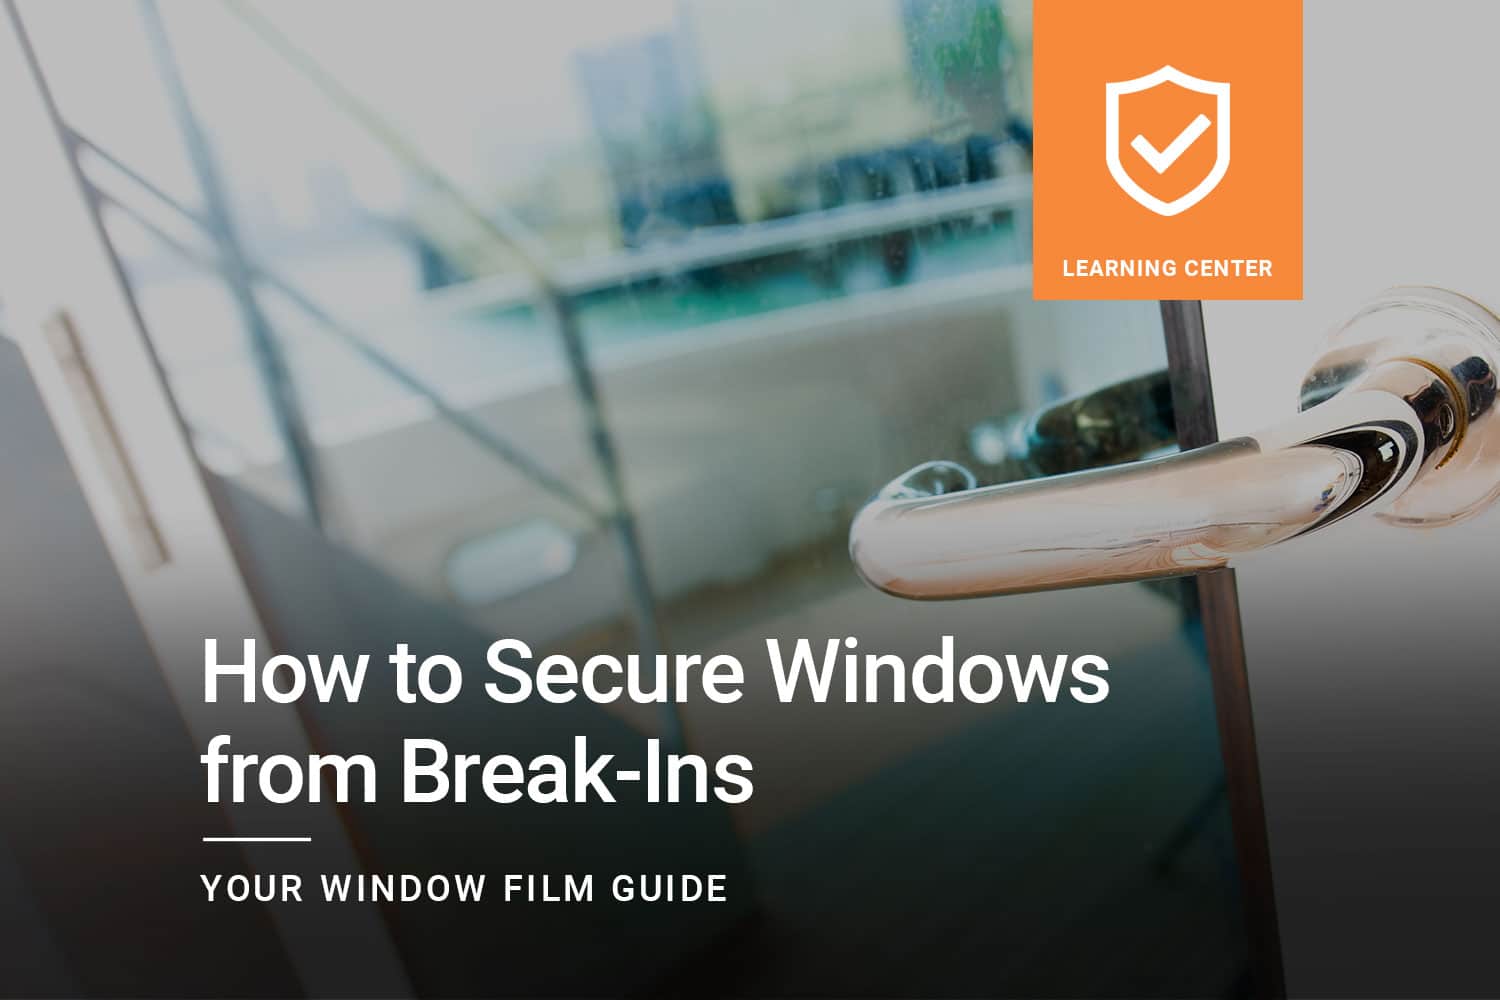 Top tips on how to Secure Windows from Break-Ins from ClimatePro. Get a free estimate for Safety Film, Crimsafe, and Riot Glass.